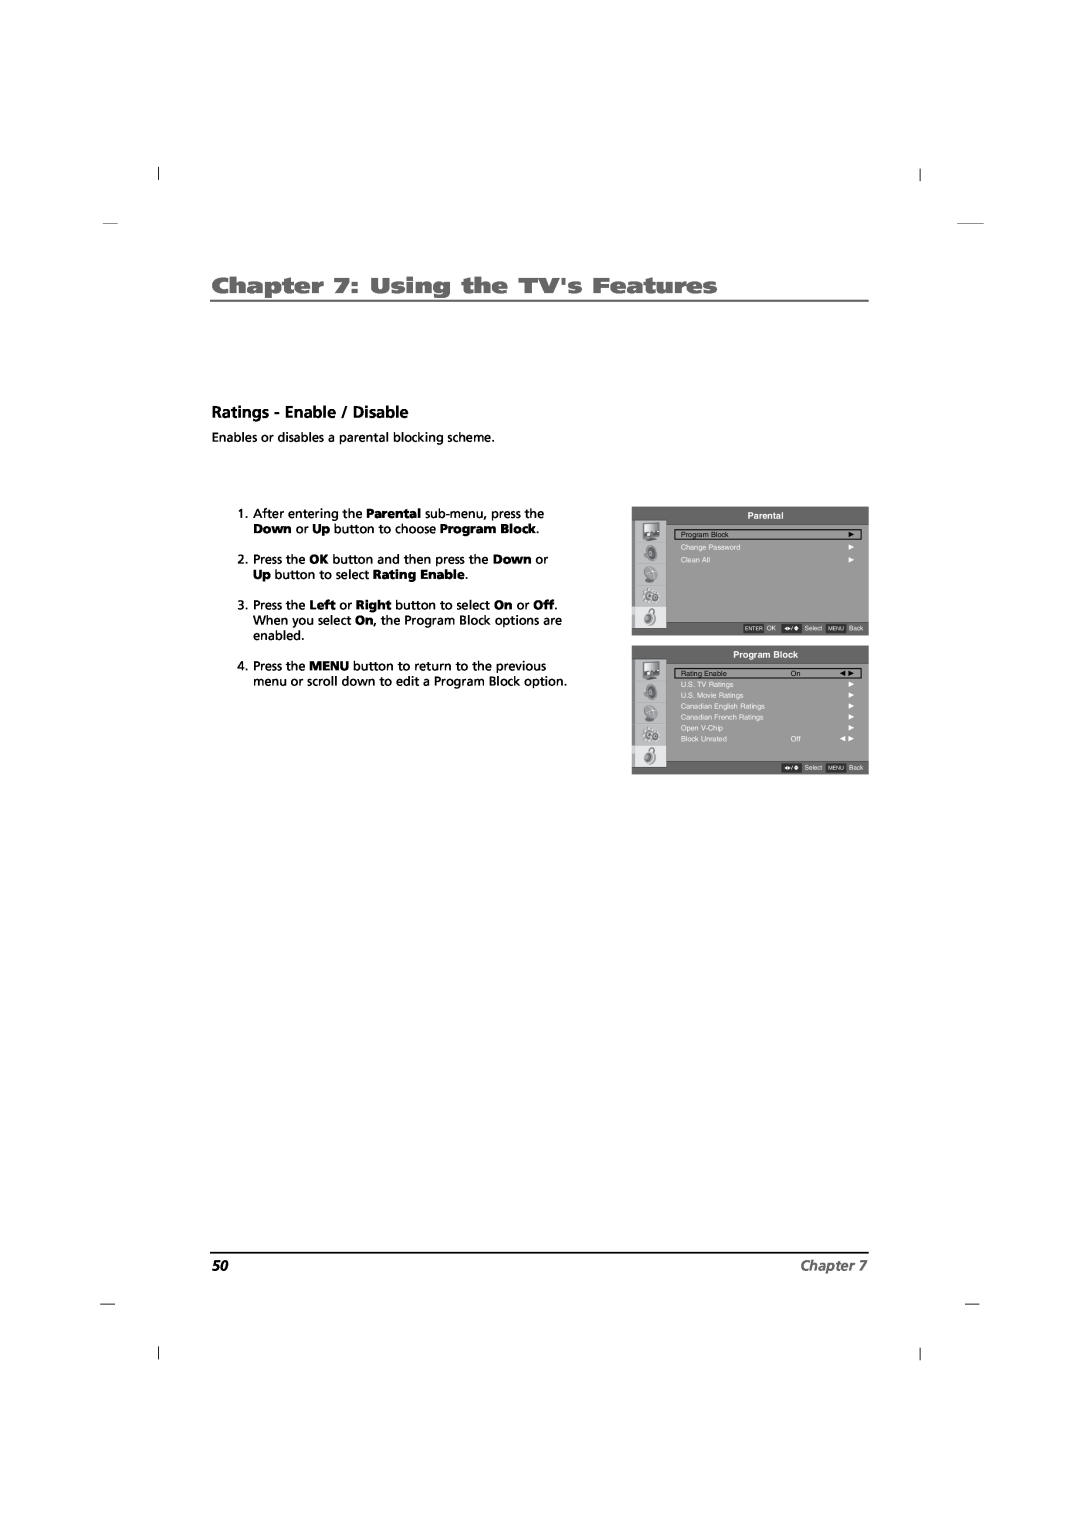 RCA J12H770 manual Ratings - Enable / Disable, Using the TVs Features, Chapter 